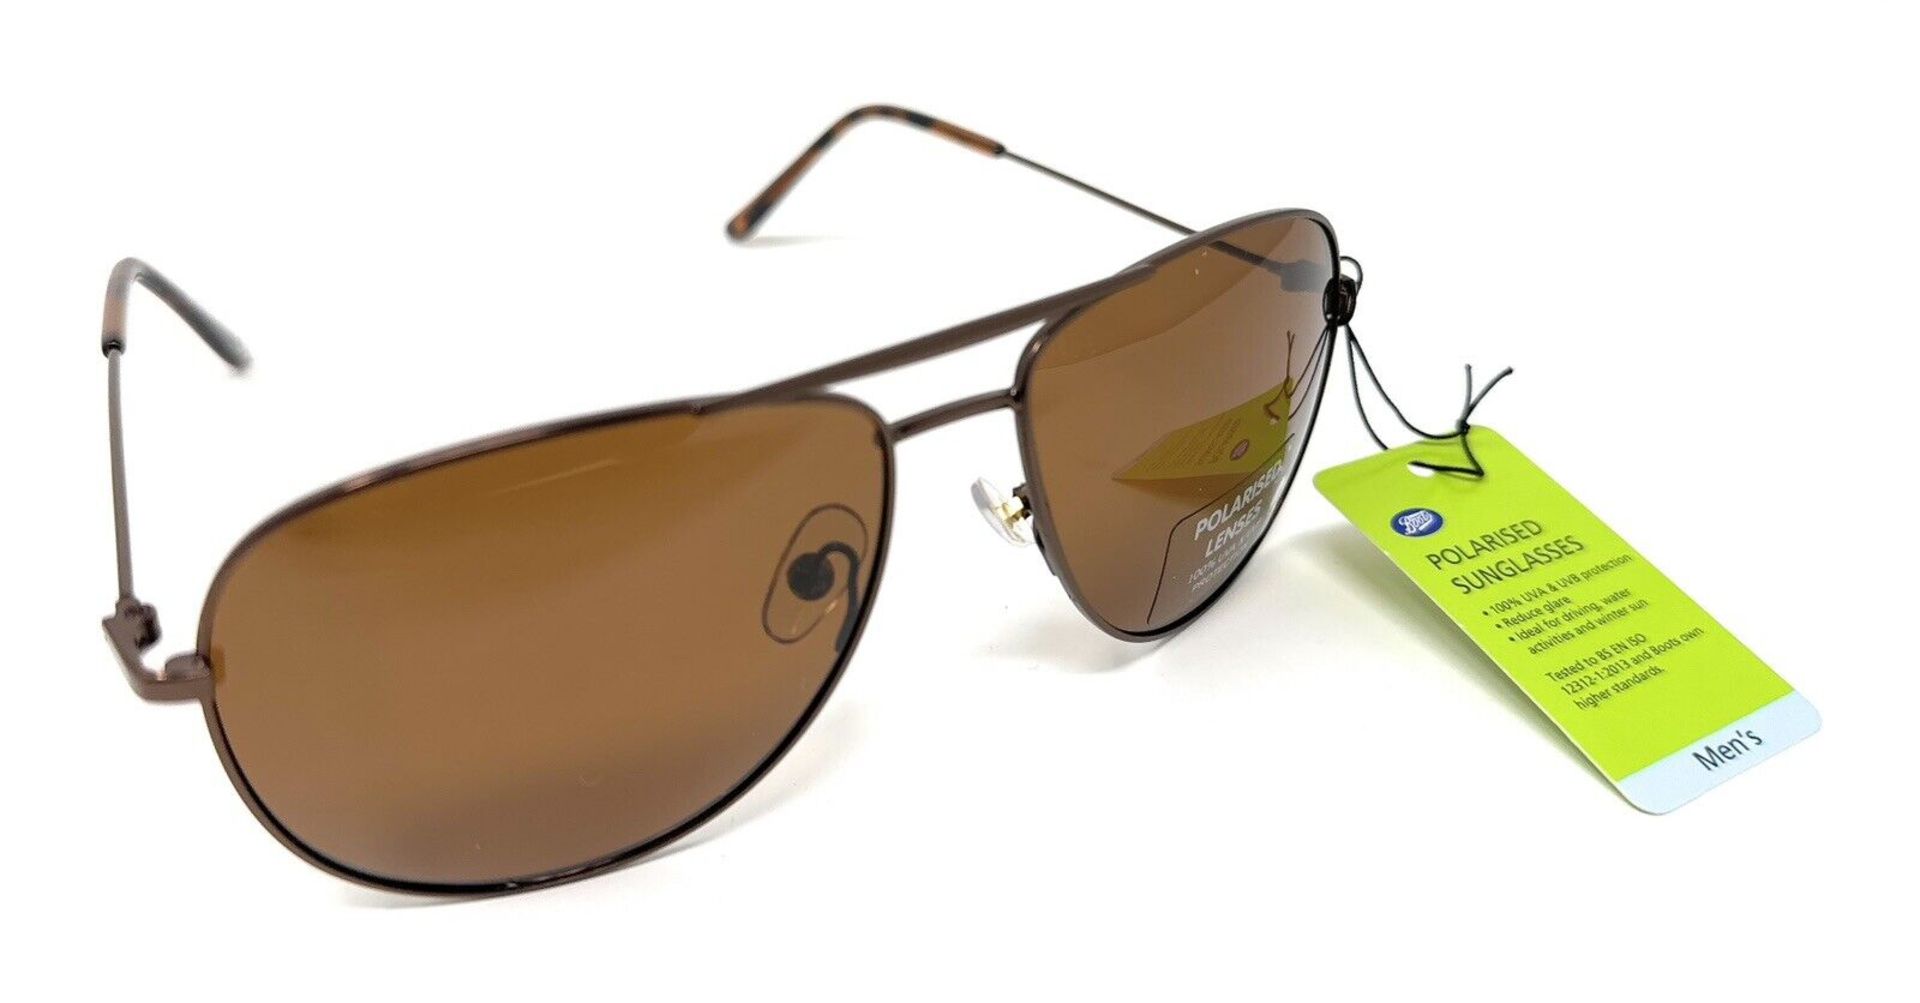 20 x Boots Polarised Lens Pilot Style Sunglasses 100% UVA - (NEW) - BOOTS RRP Â£660 ! - Image 2 of 7